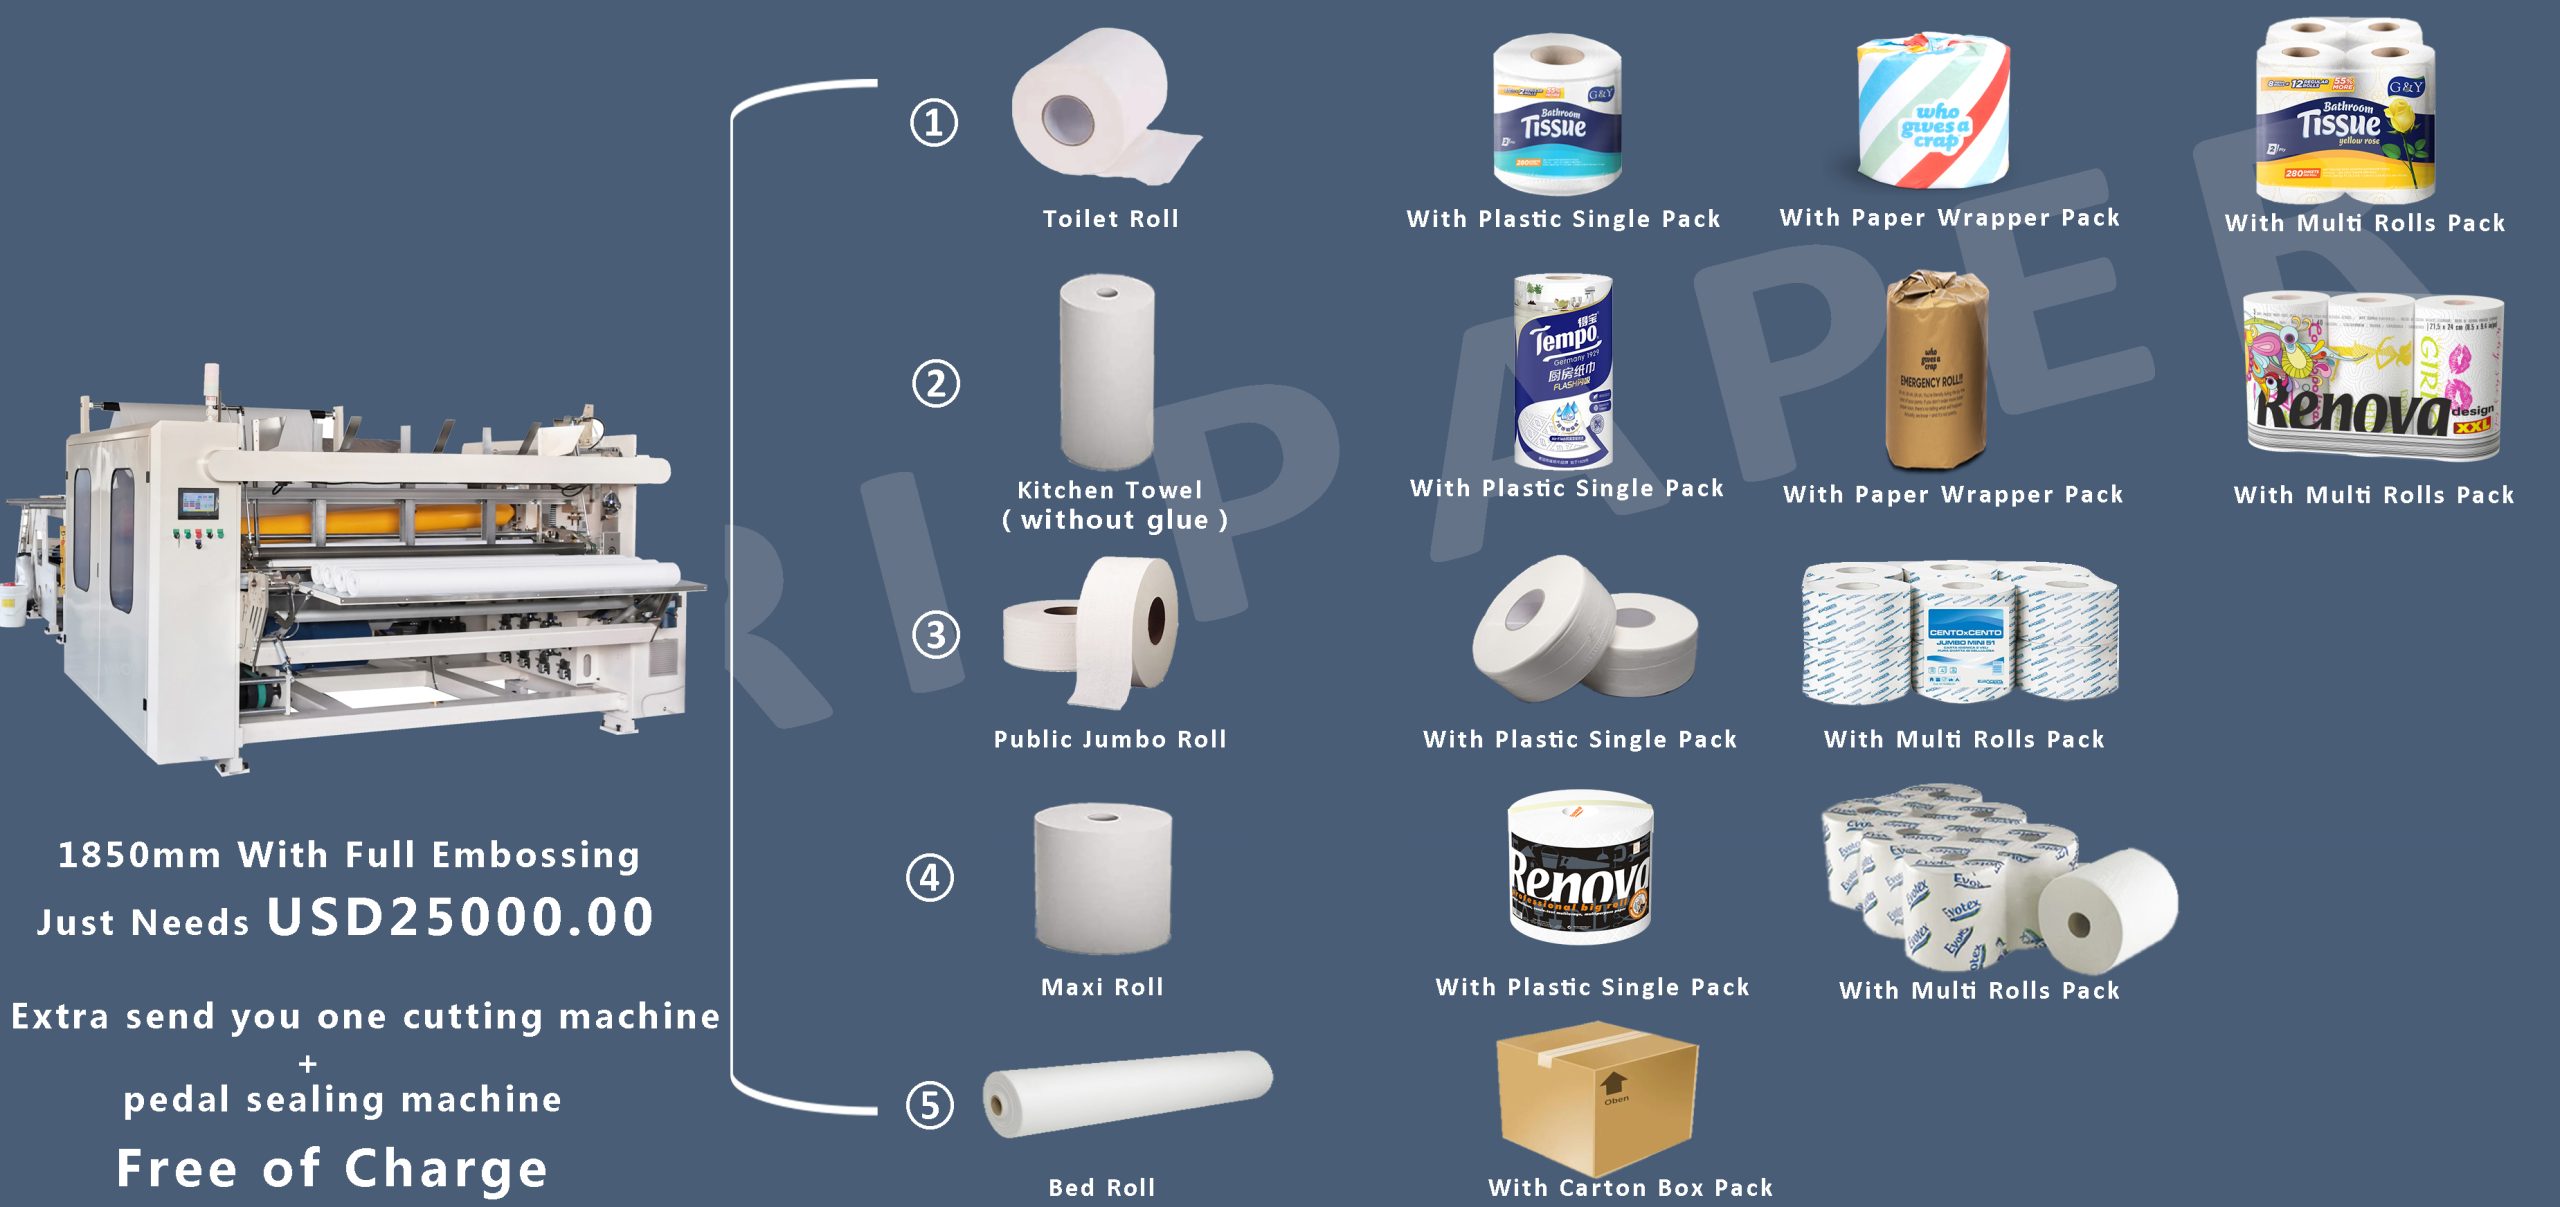 toilet paper manufacturing business plans free downloads